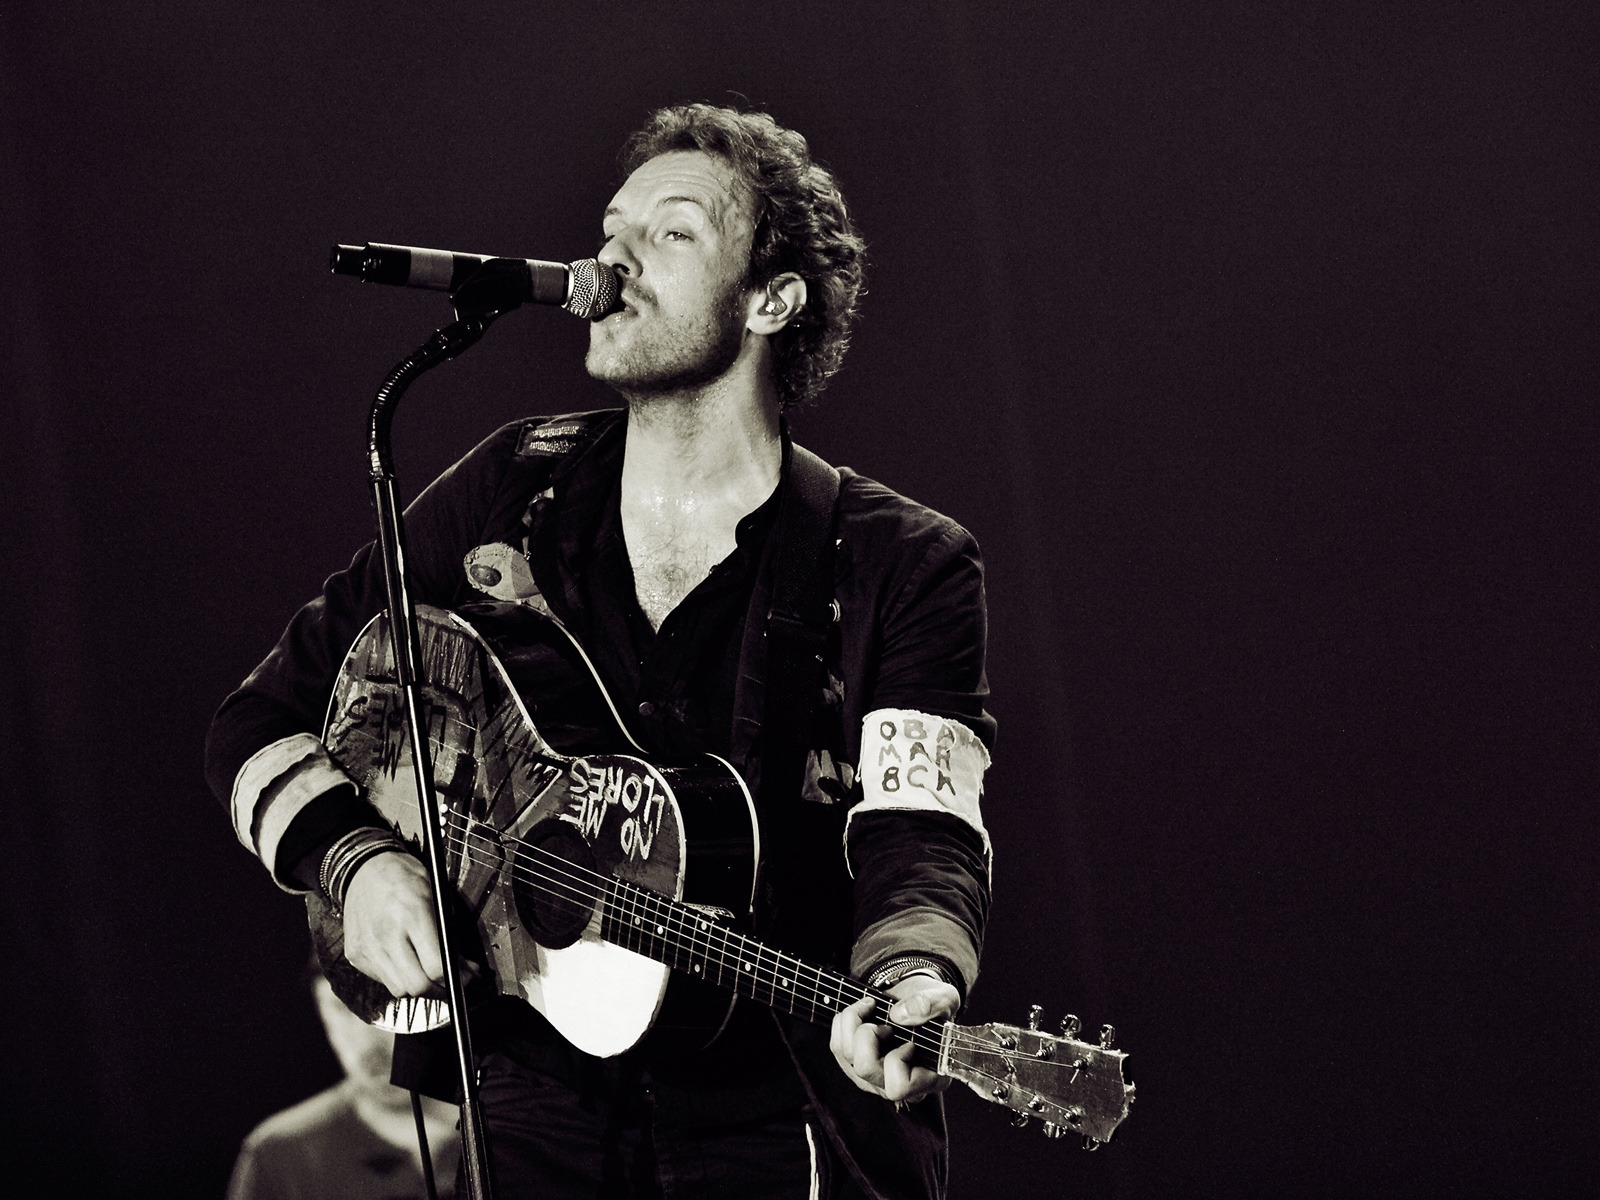 Chris Martin Coldplay for 1600 x 1200 resolution